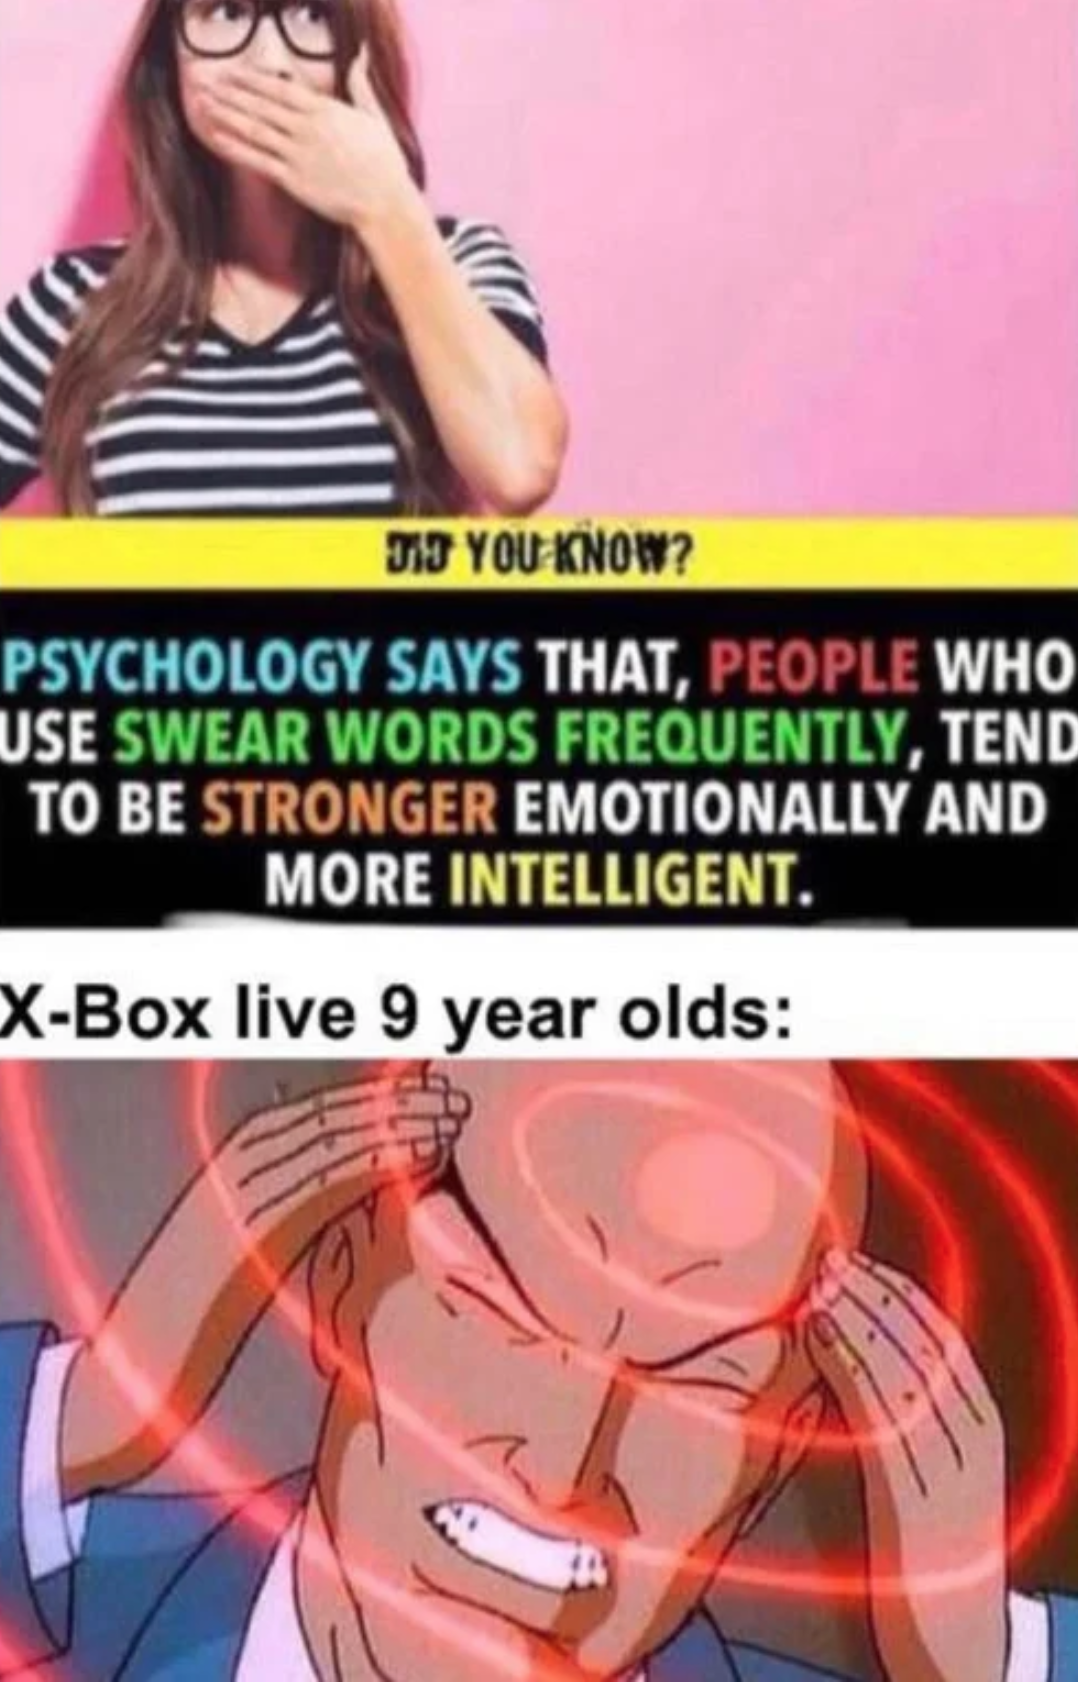 obama's last name - 313 You Know? Psychology Says That, People Who Use Swear Words Frequently, Tend To Be Stronger Emotionally And More Intelligent. XBox live 9 year olds